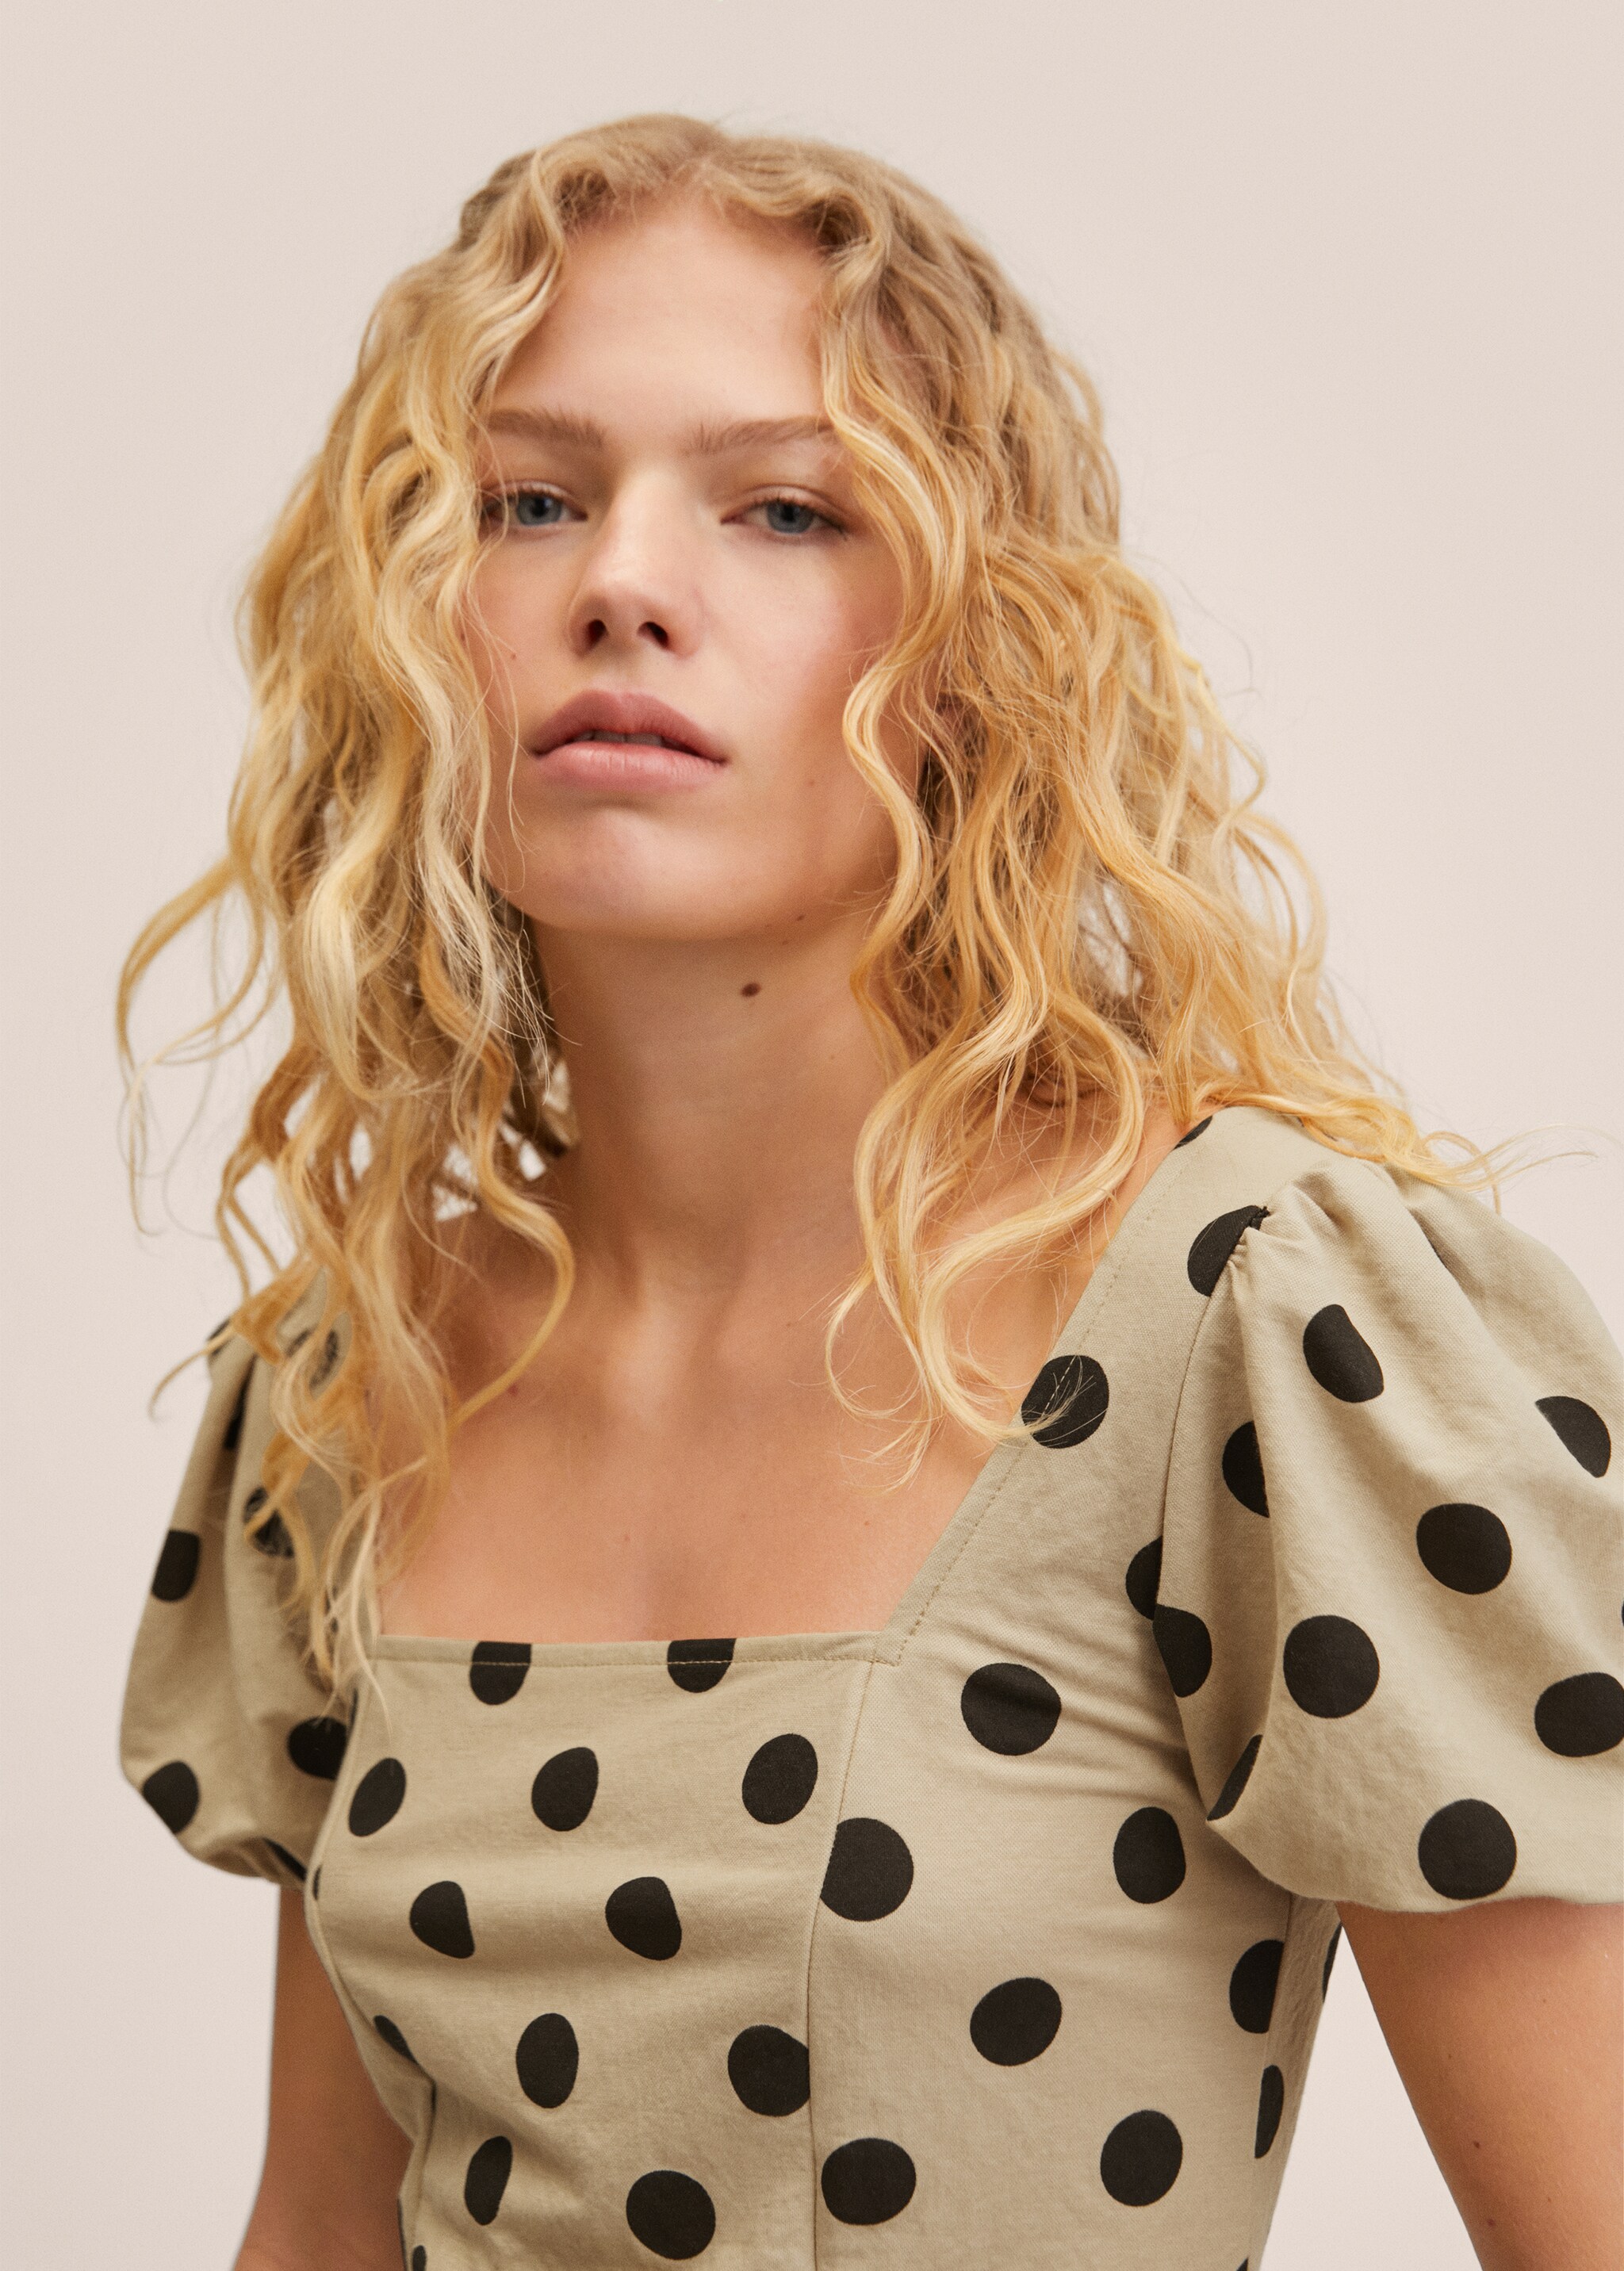 Polka-dot crop top - Details of the article 1